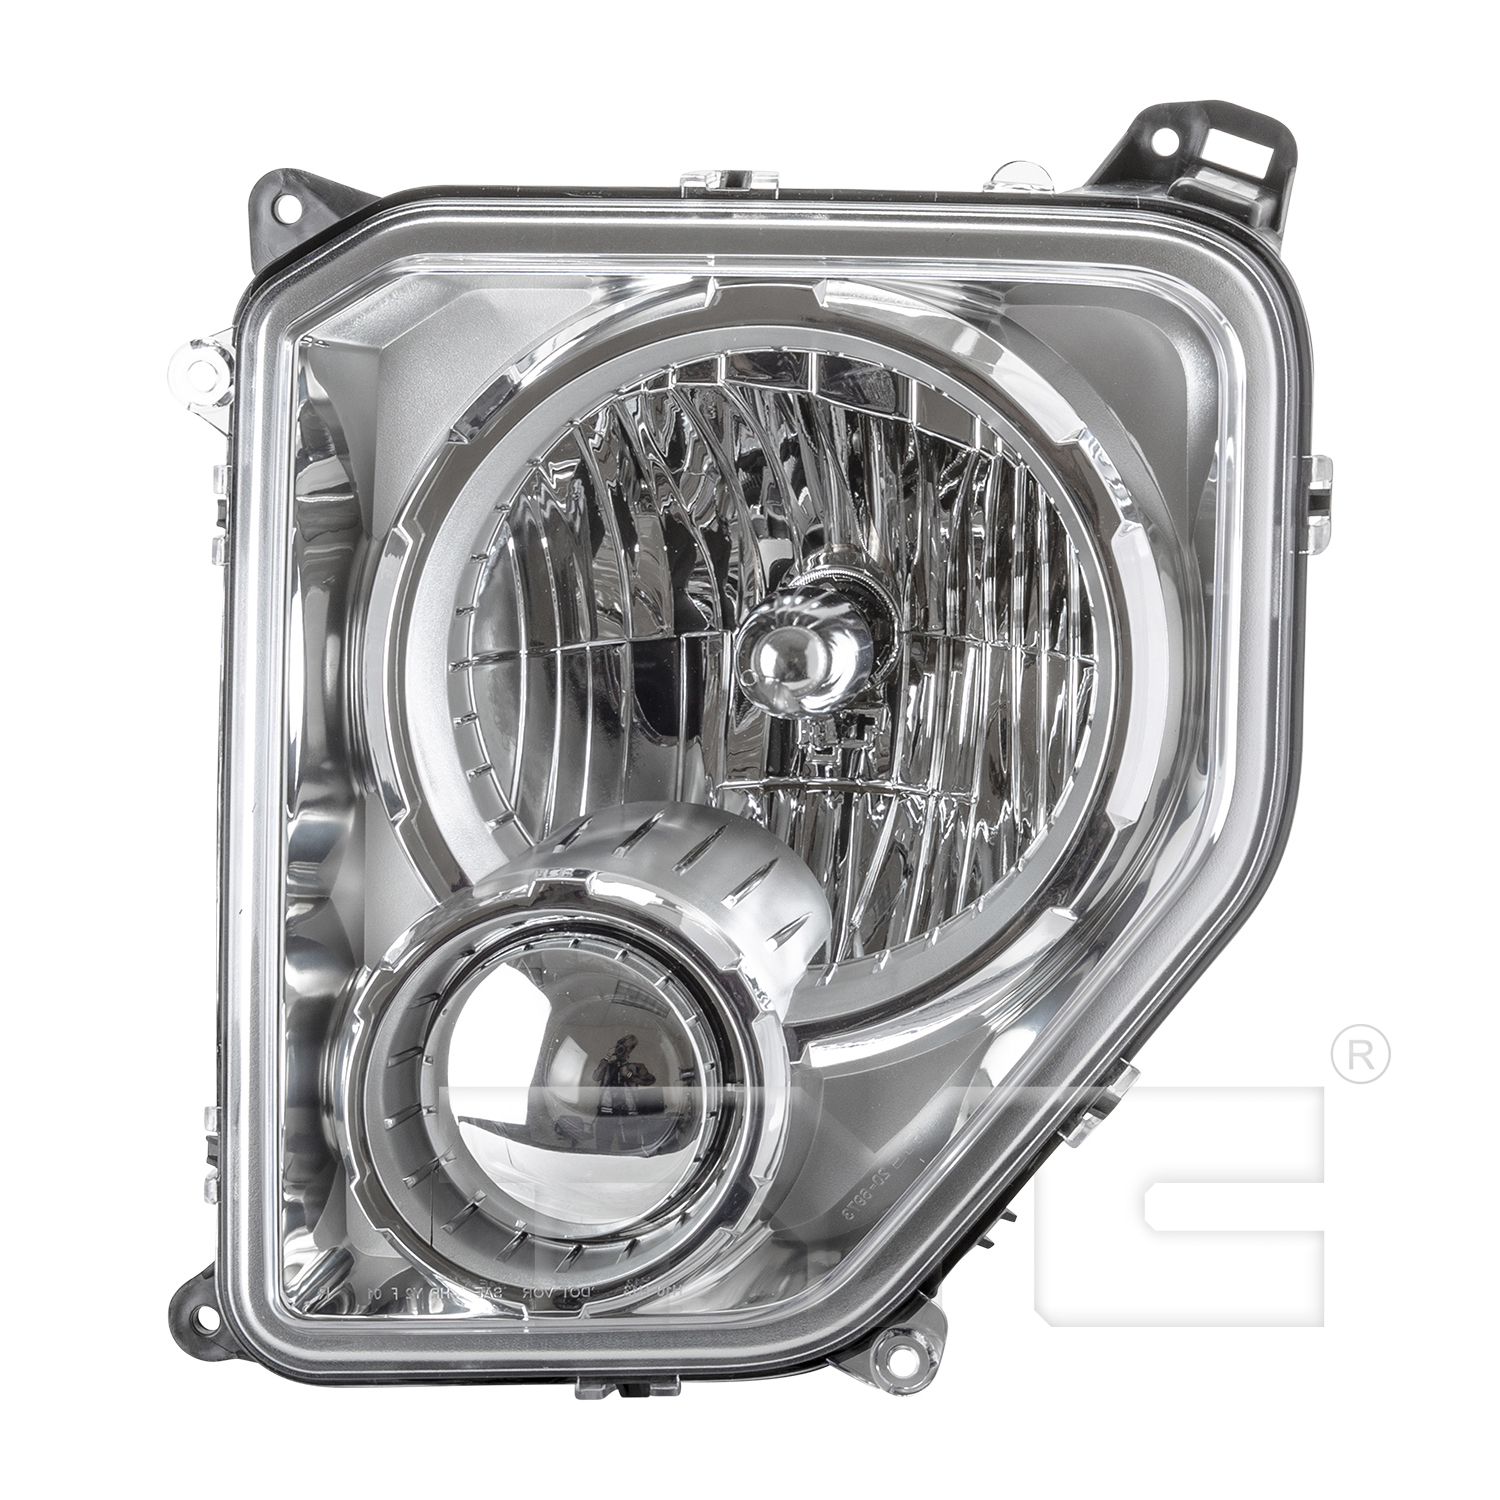 Aftermarket HEADLIGHTS for JEEP - LIBERTY, LIBERTY,10-12,LT Headlamp assy composite